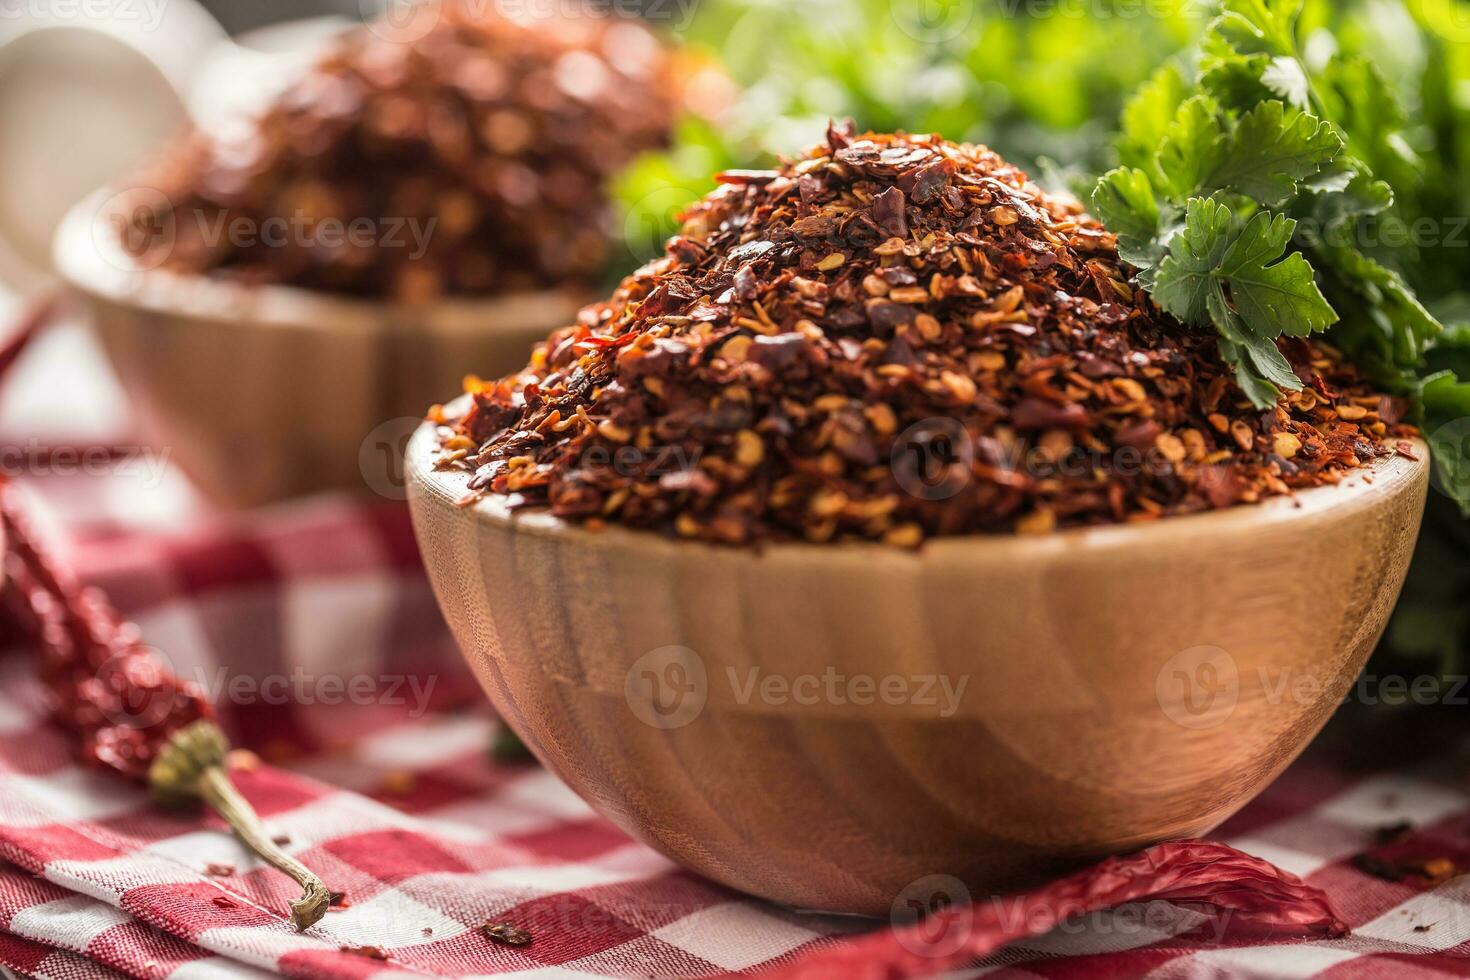 Dried and crushed chili peppers in wooden bowles with parsley herbs photo